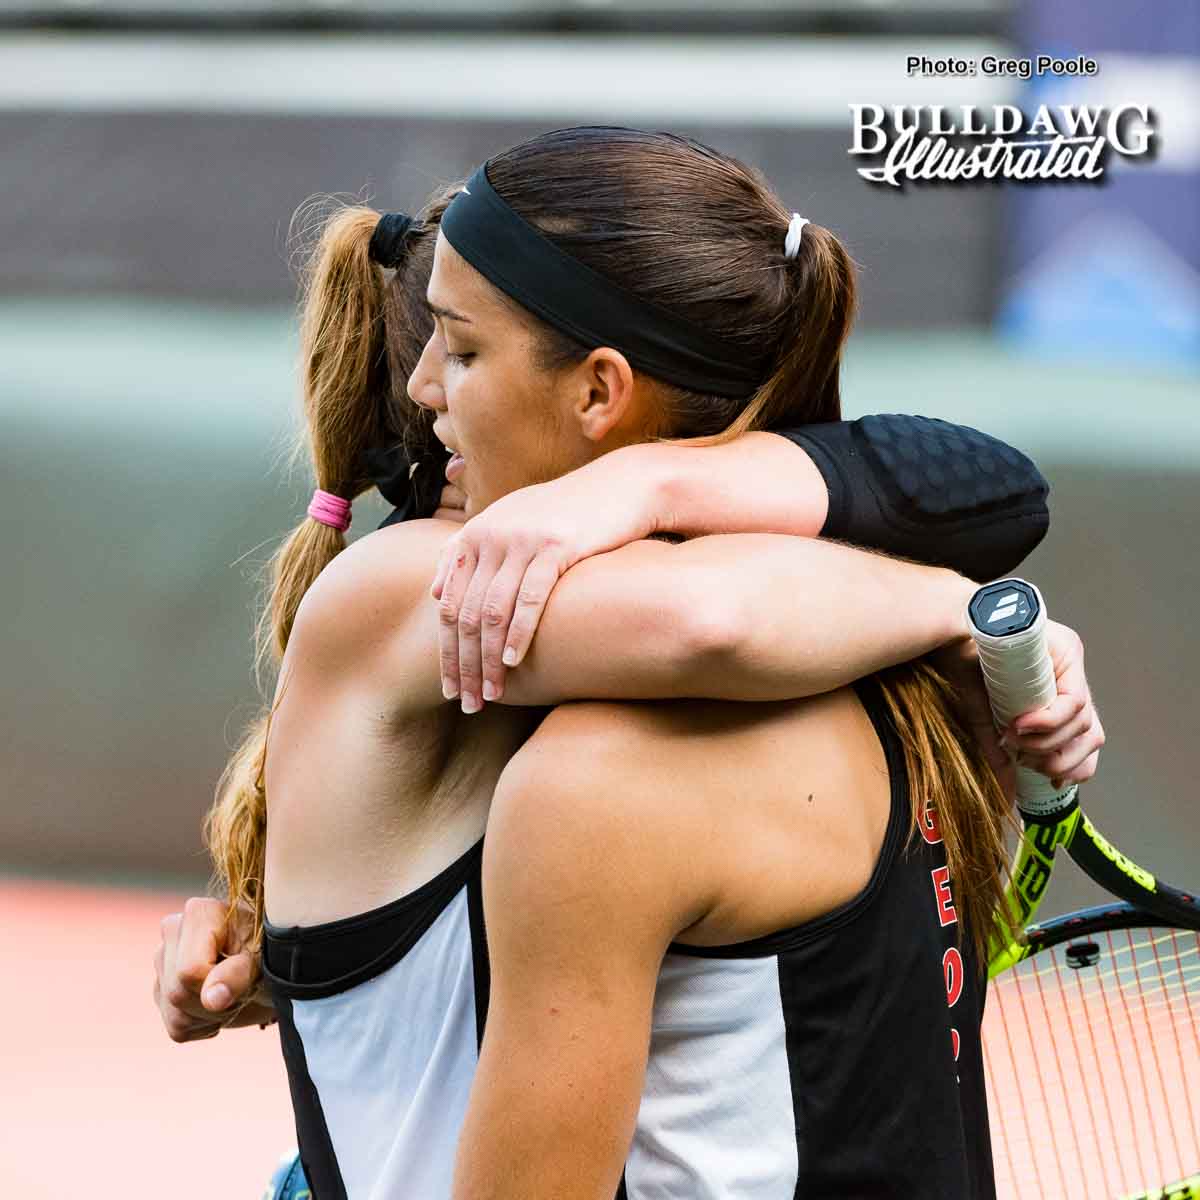 Kennedy Shaffer and Elena Christofi after their tough loss - NCAA Doubles Quarterfinals – May 27, 2017